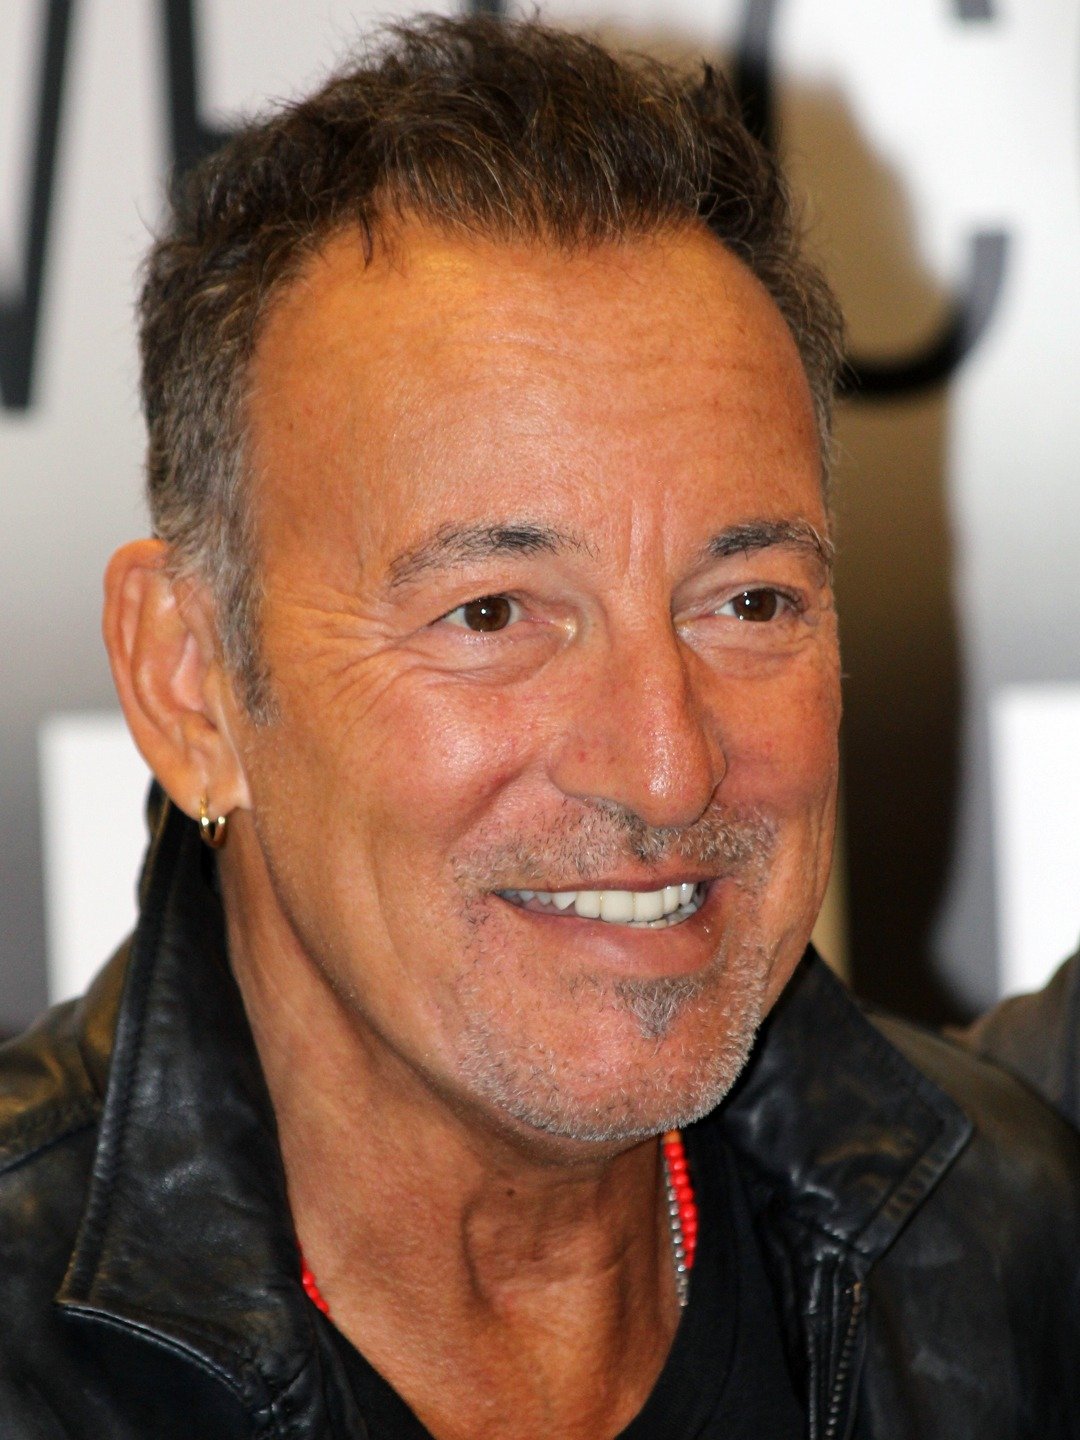 How tall is Bruce Springsteen?